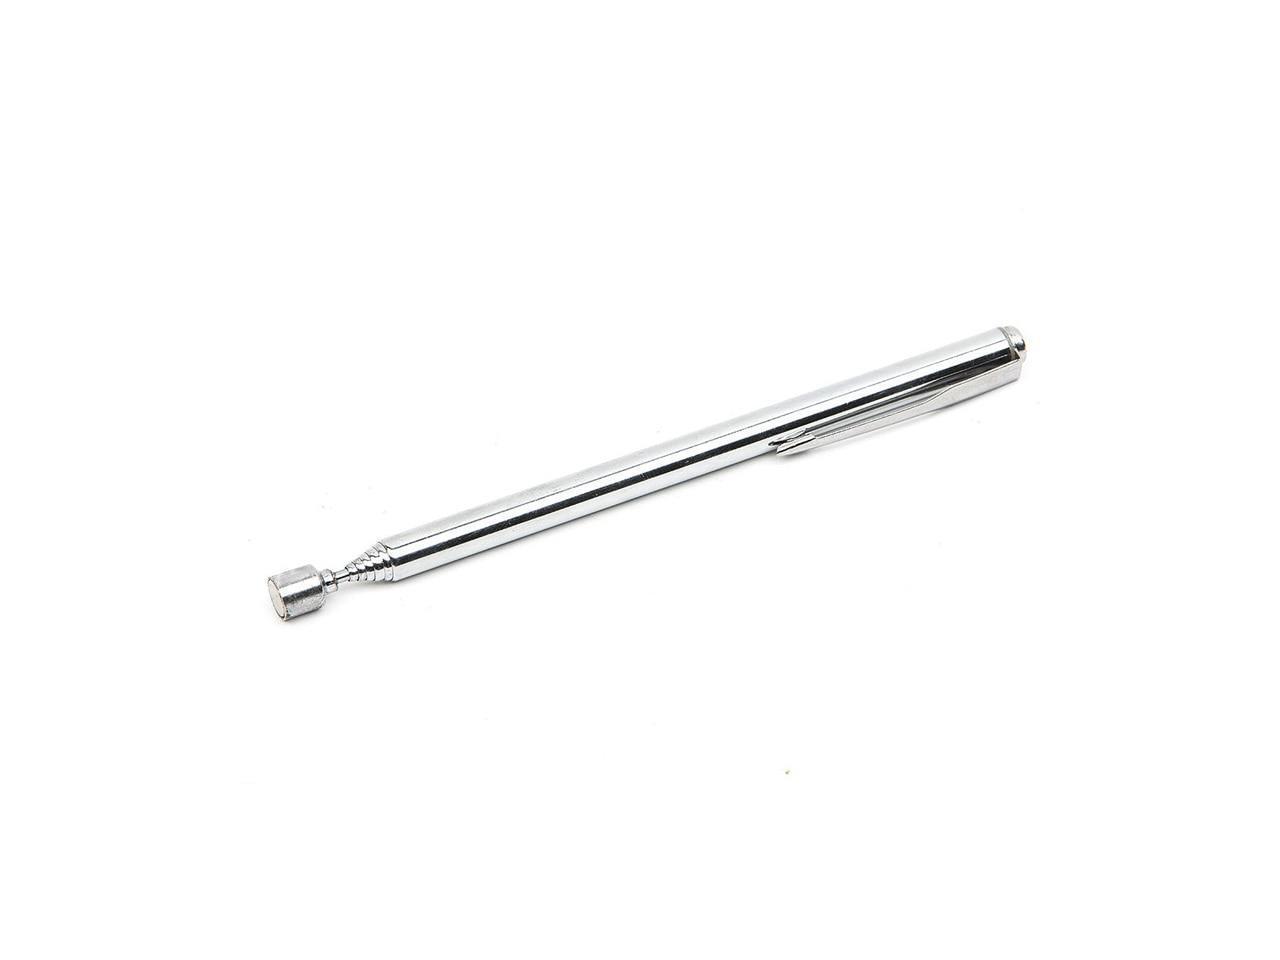 Portable Telescopic Magnetic Pick Up Rod Tool Stick Magnet 25.6" Extending .. 